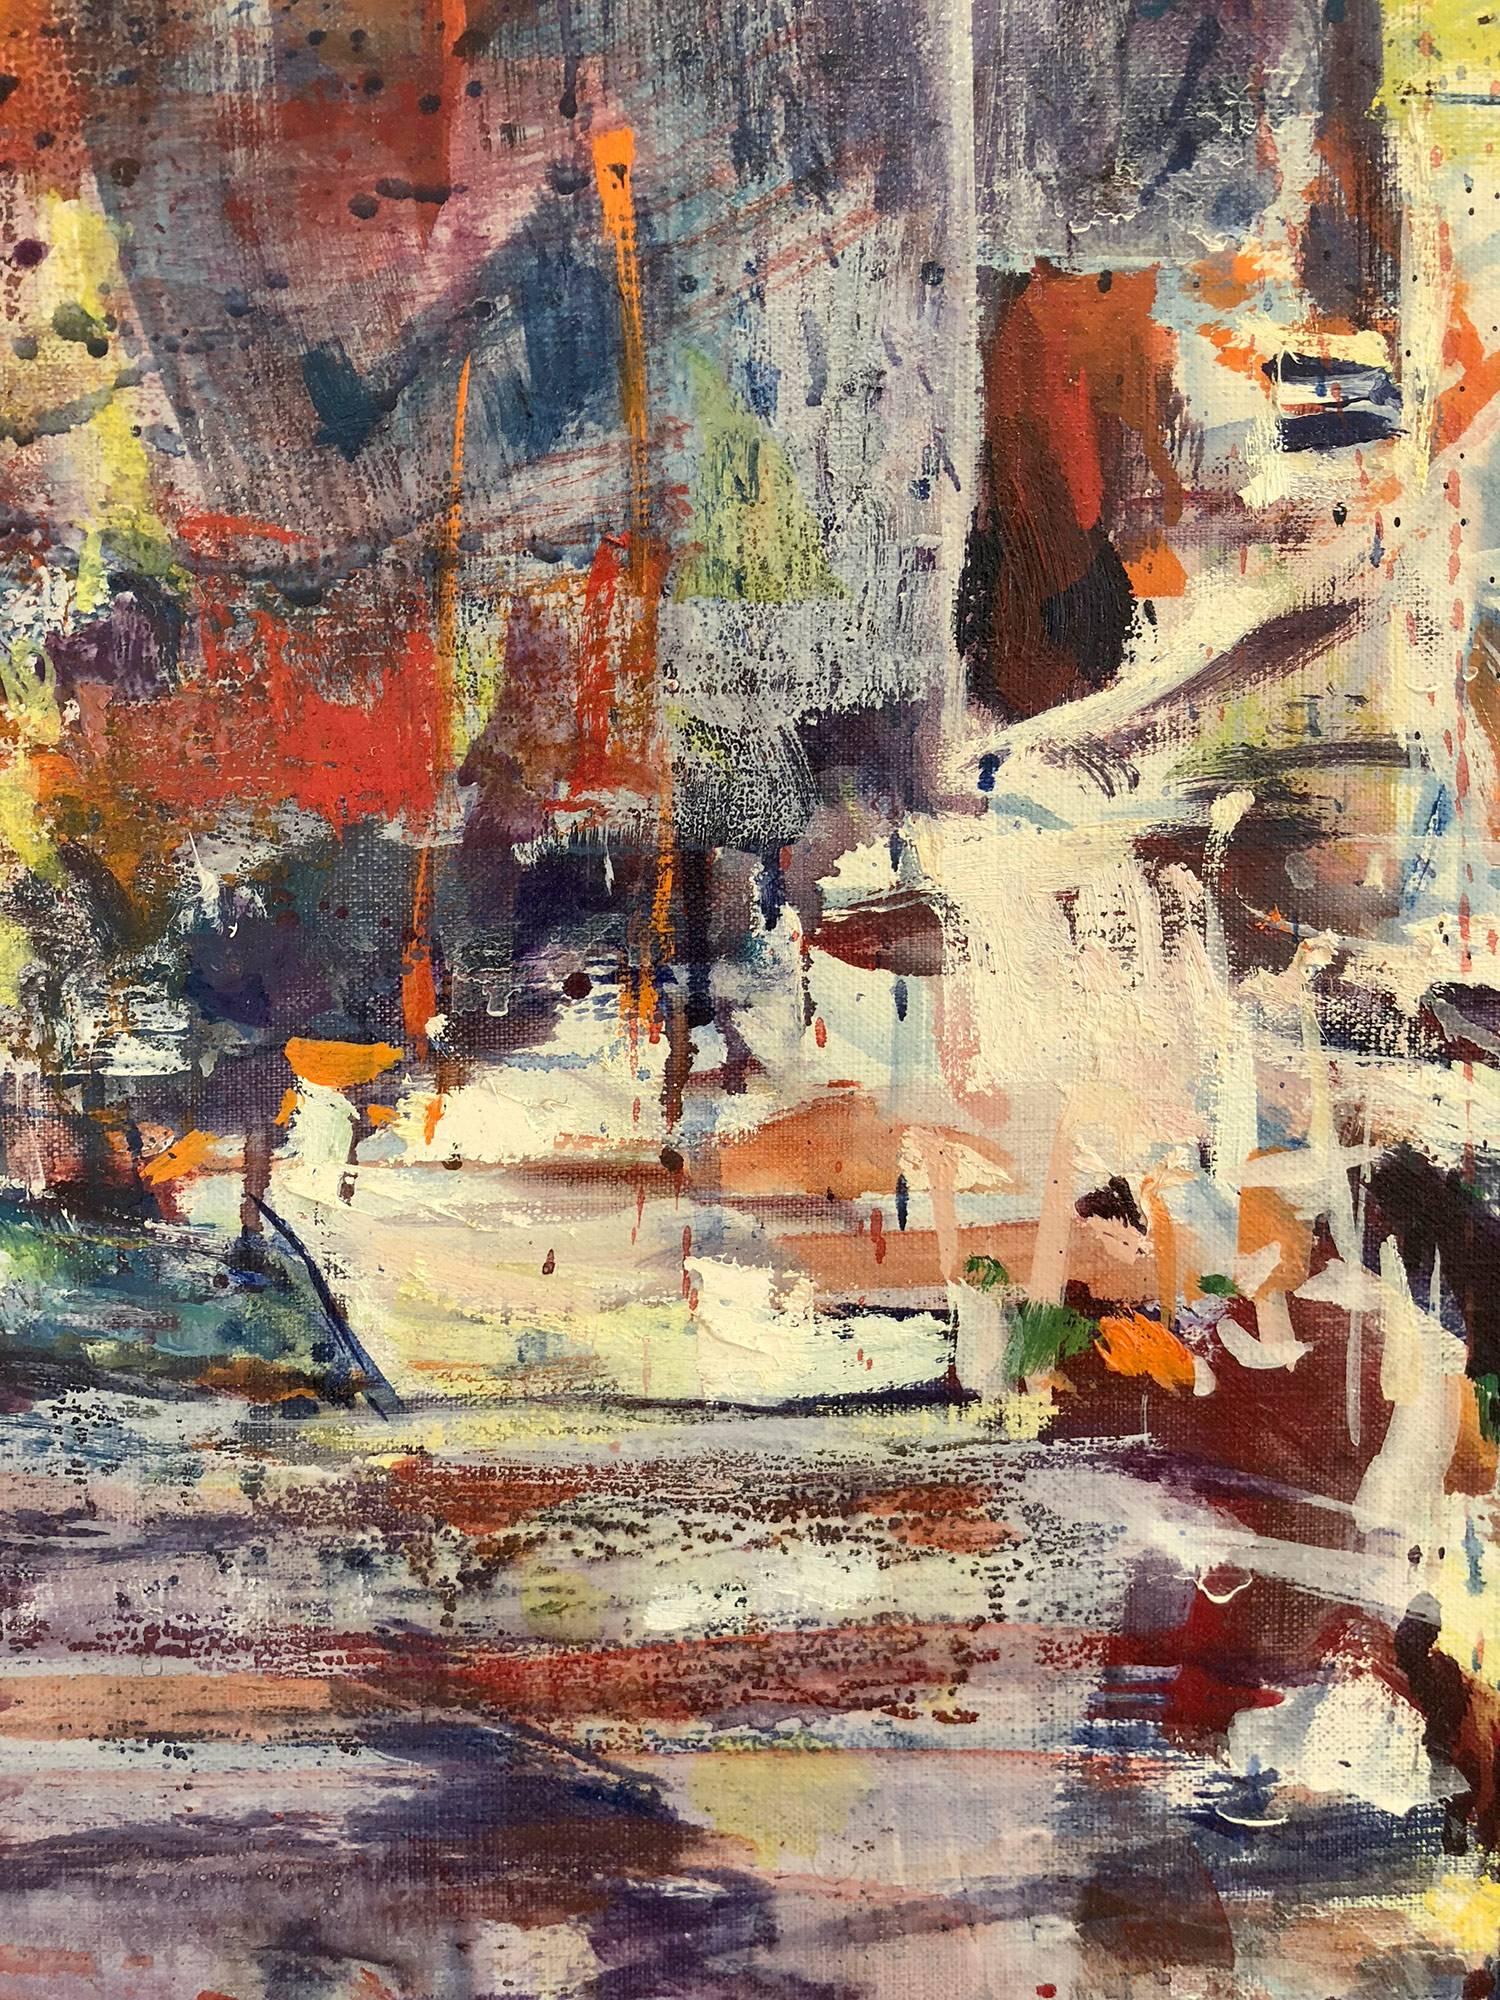 Large Abstract Harbor Scene - Abstract Impressionist Painting by Robert Freiman